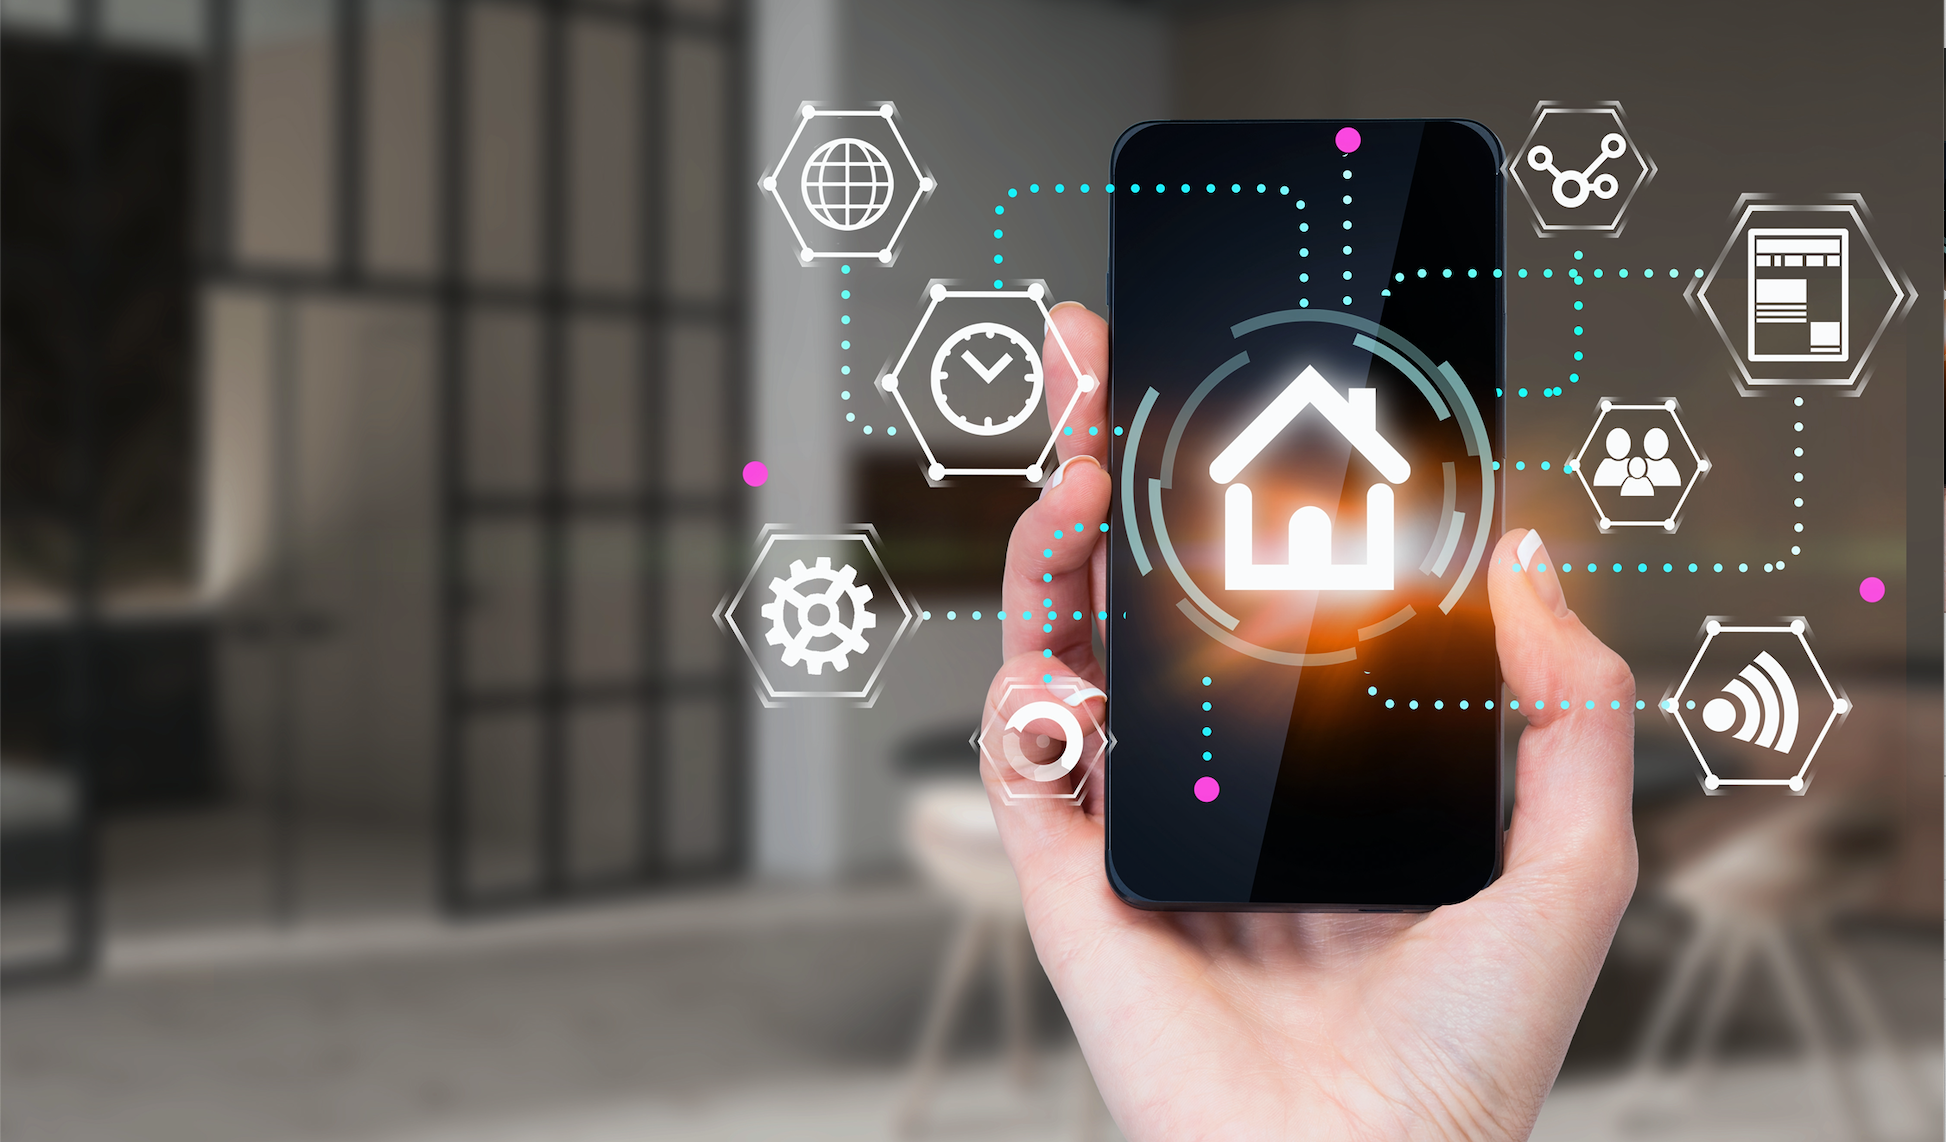 So tell me - what is a Smart Home?